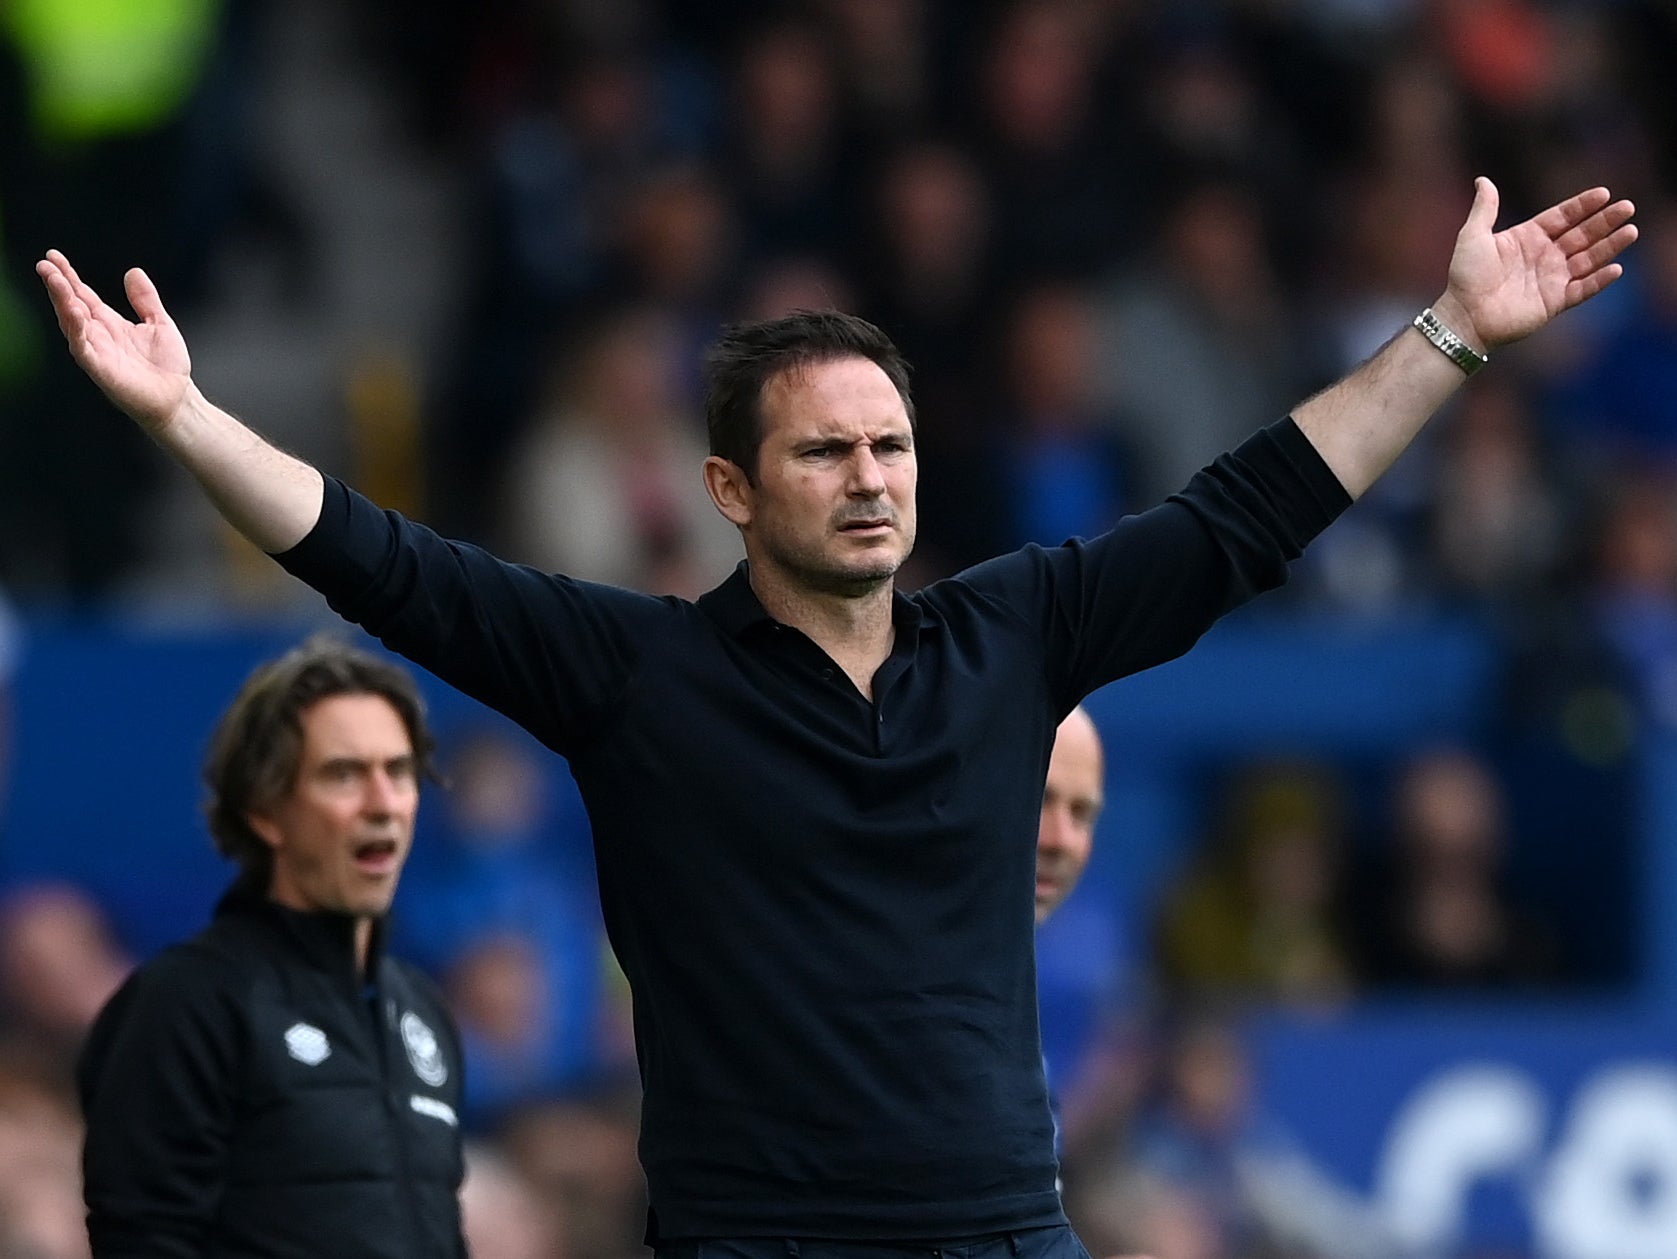 Everton coach Frank Lampard saw two of his players sent off against Brentford